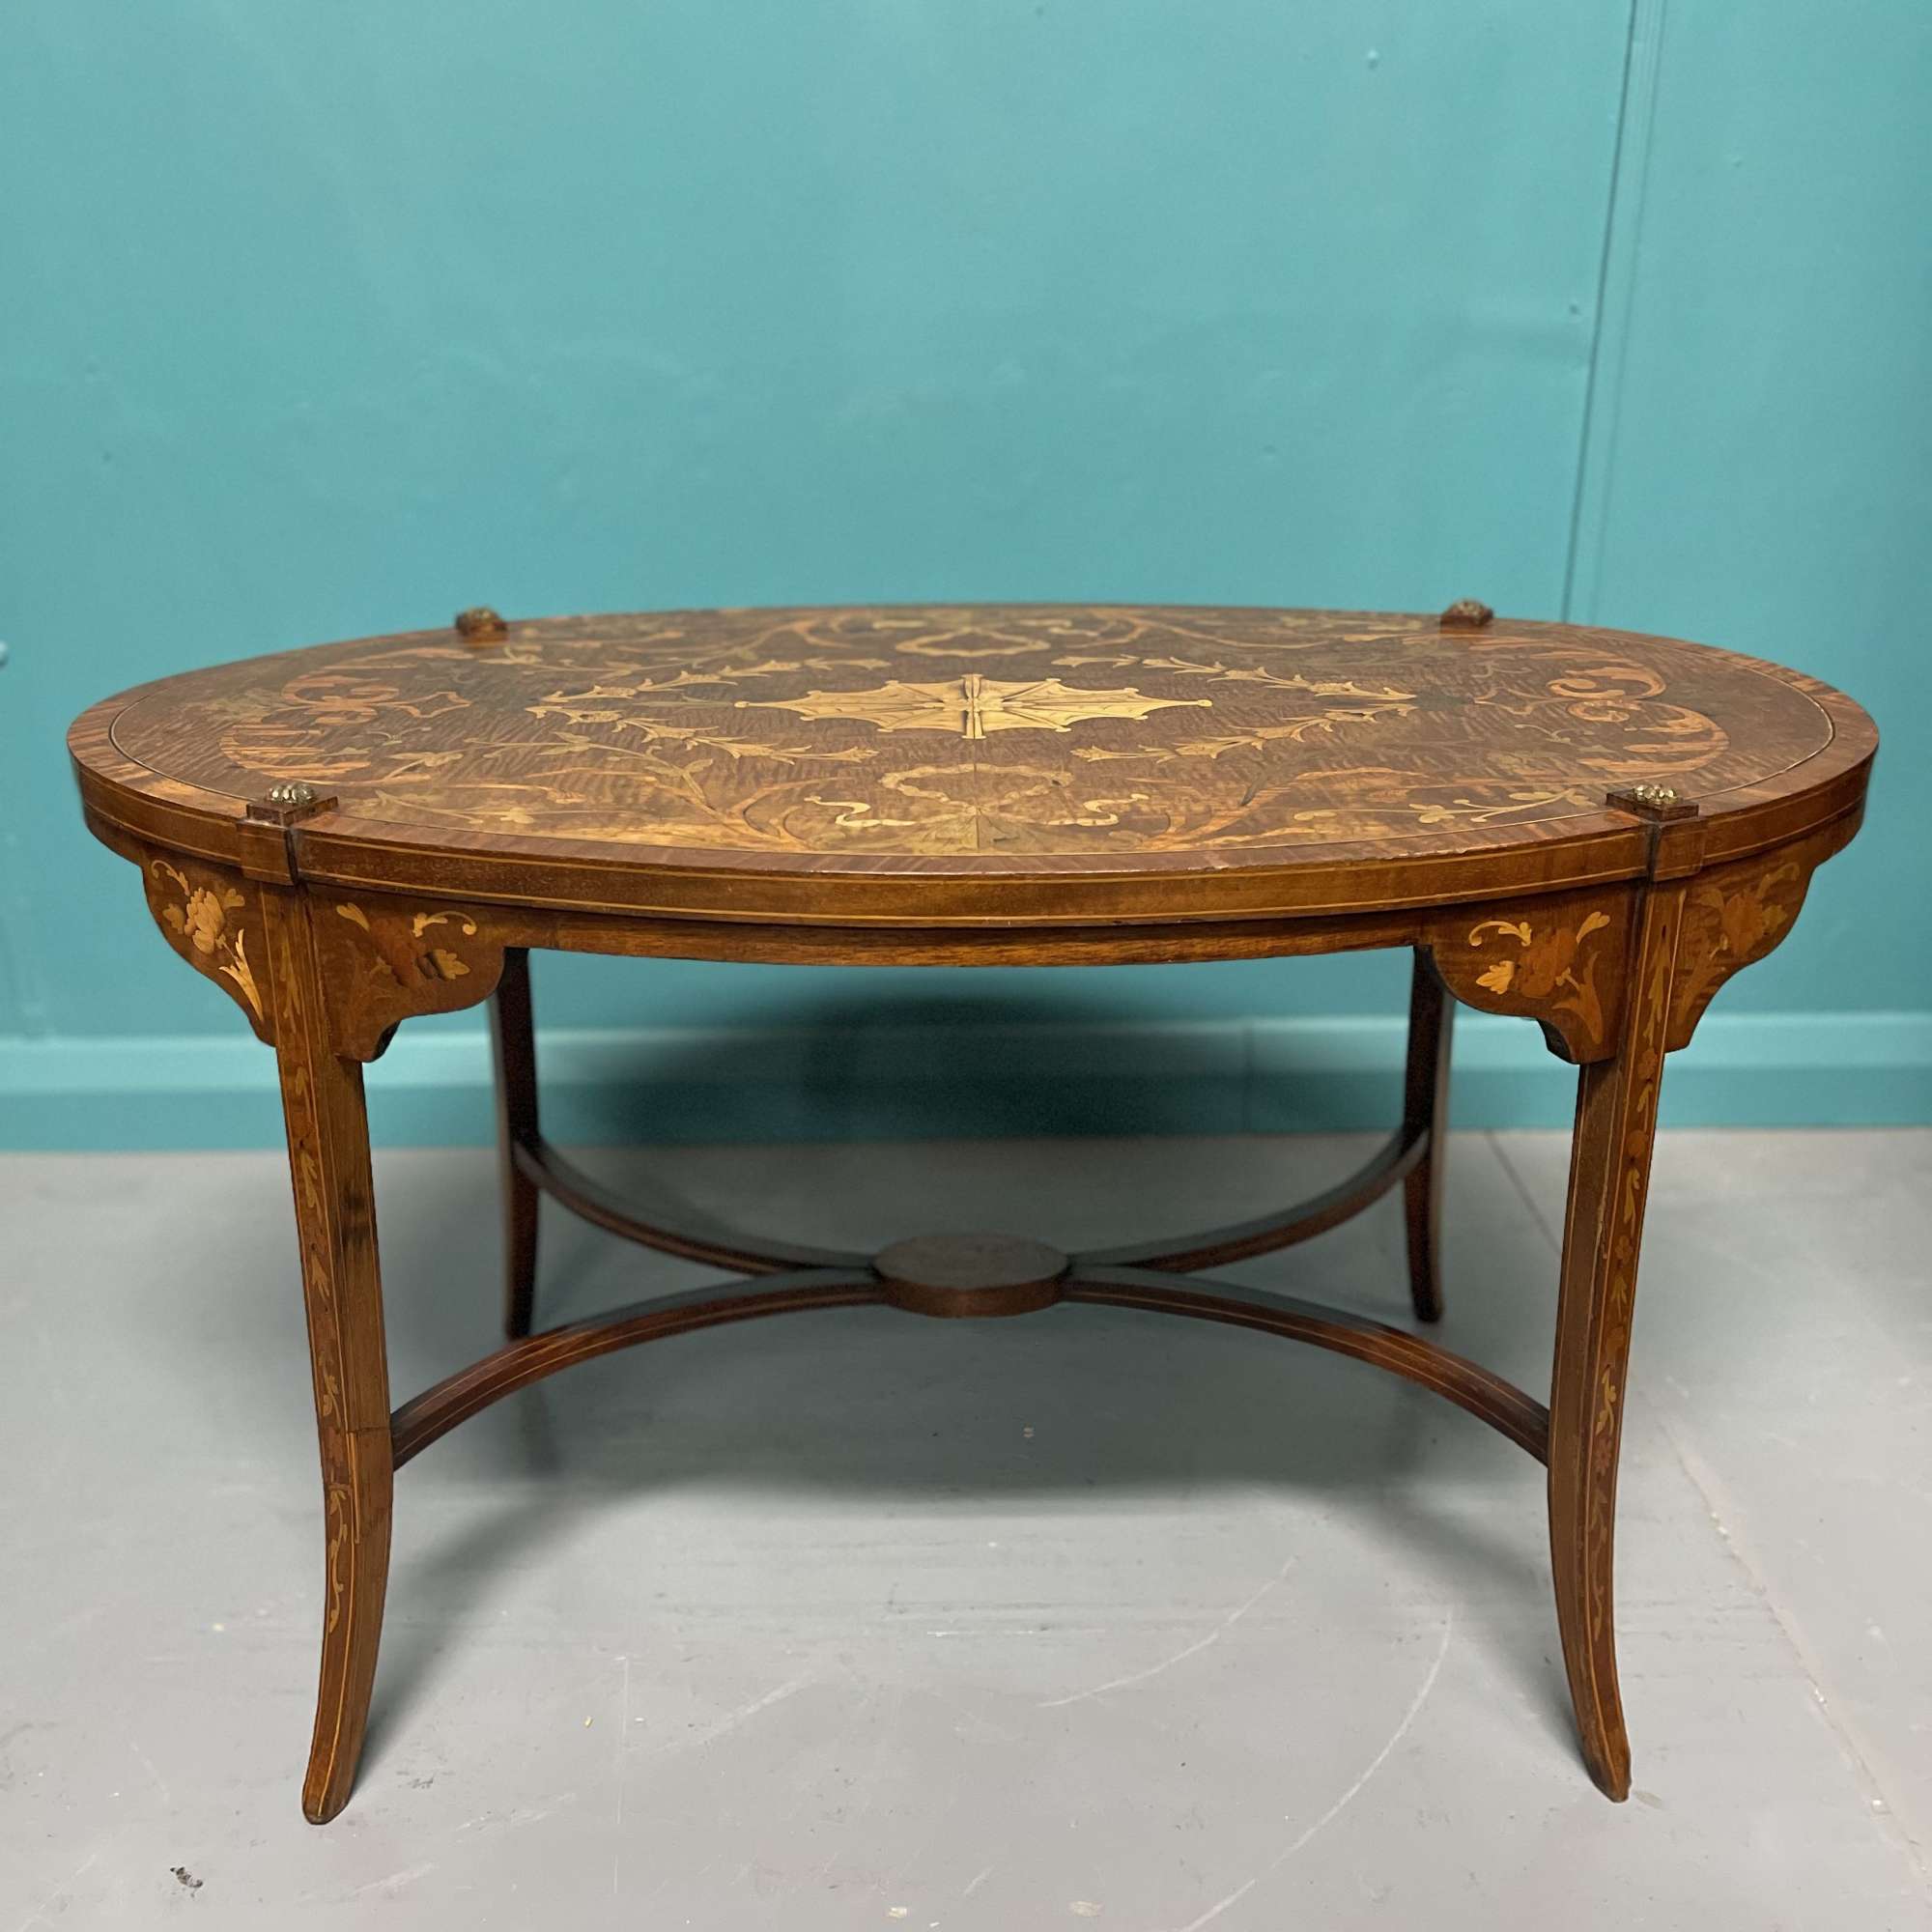 Oval marquetry coffee table by Greenwood & sons